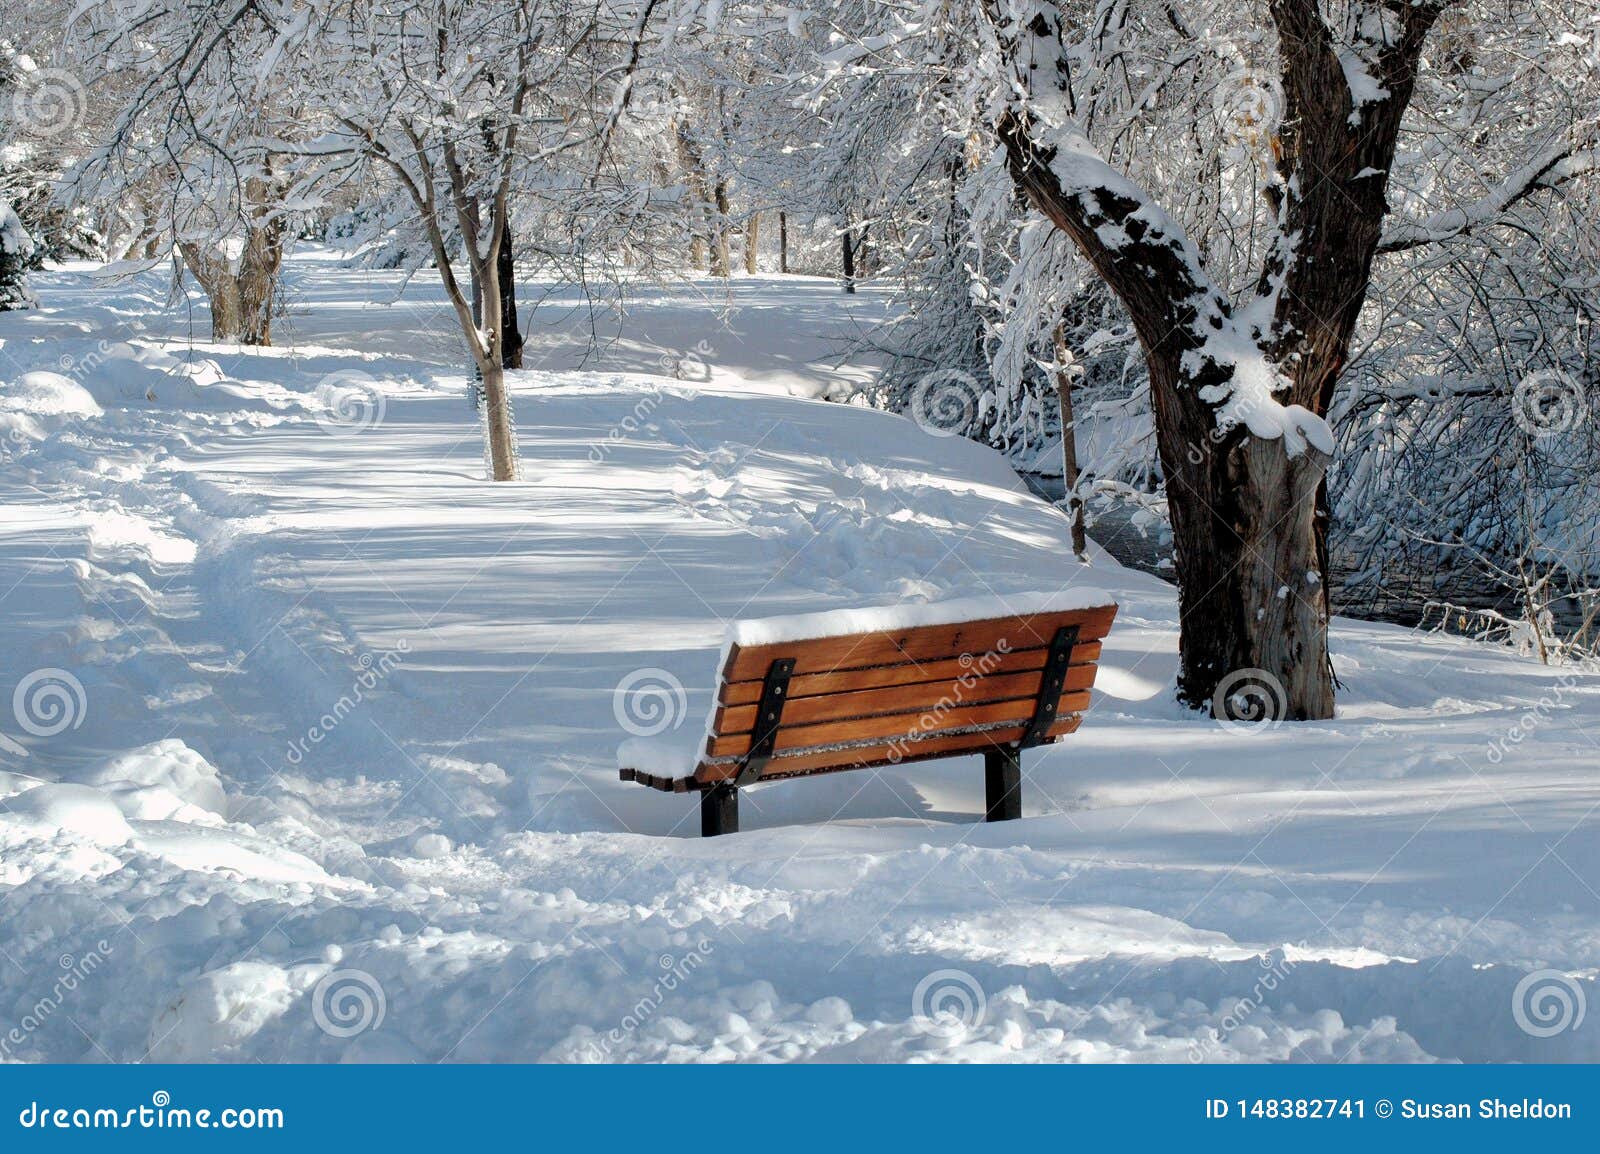 Snowy Park Bench In A Winter Park Stock Image Image Of Chilly